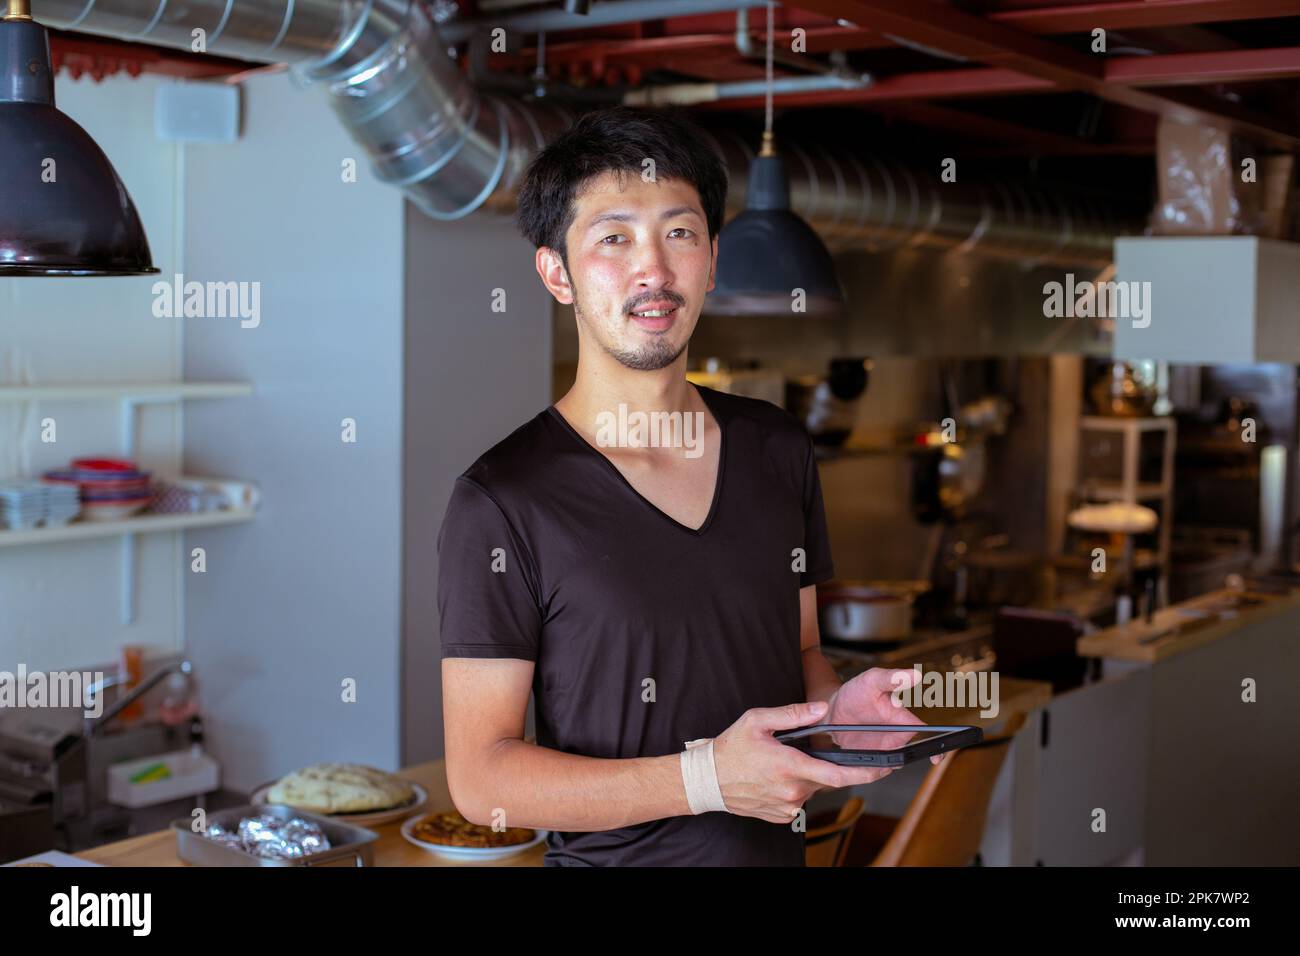 A man working in a restaurant, by an open kitchen, holding a digital tablet. Stock Photo